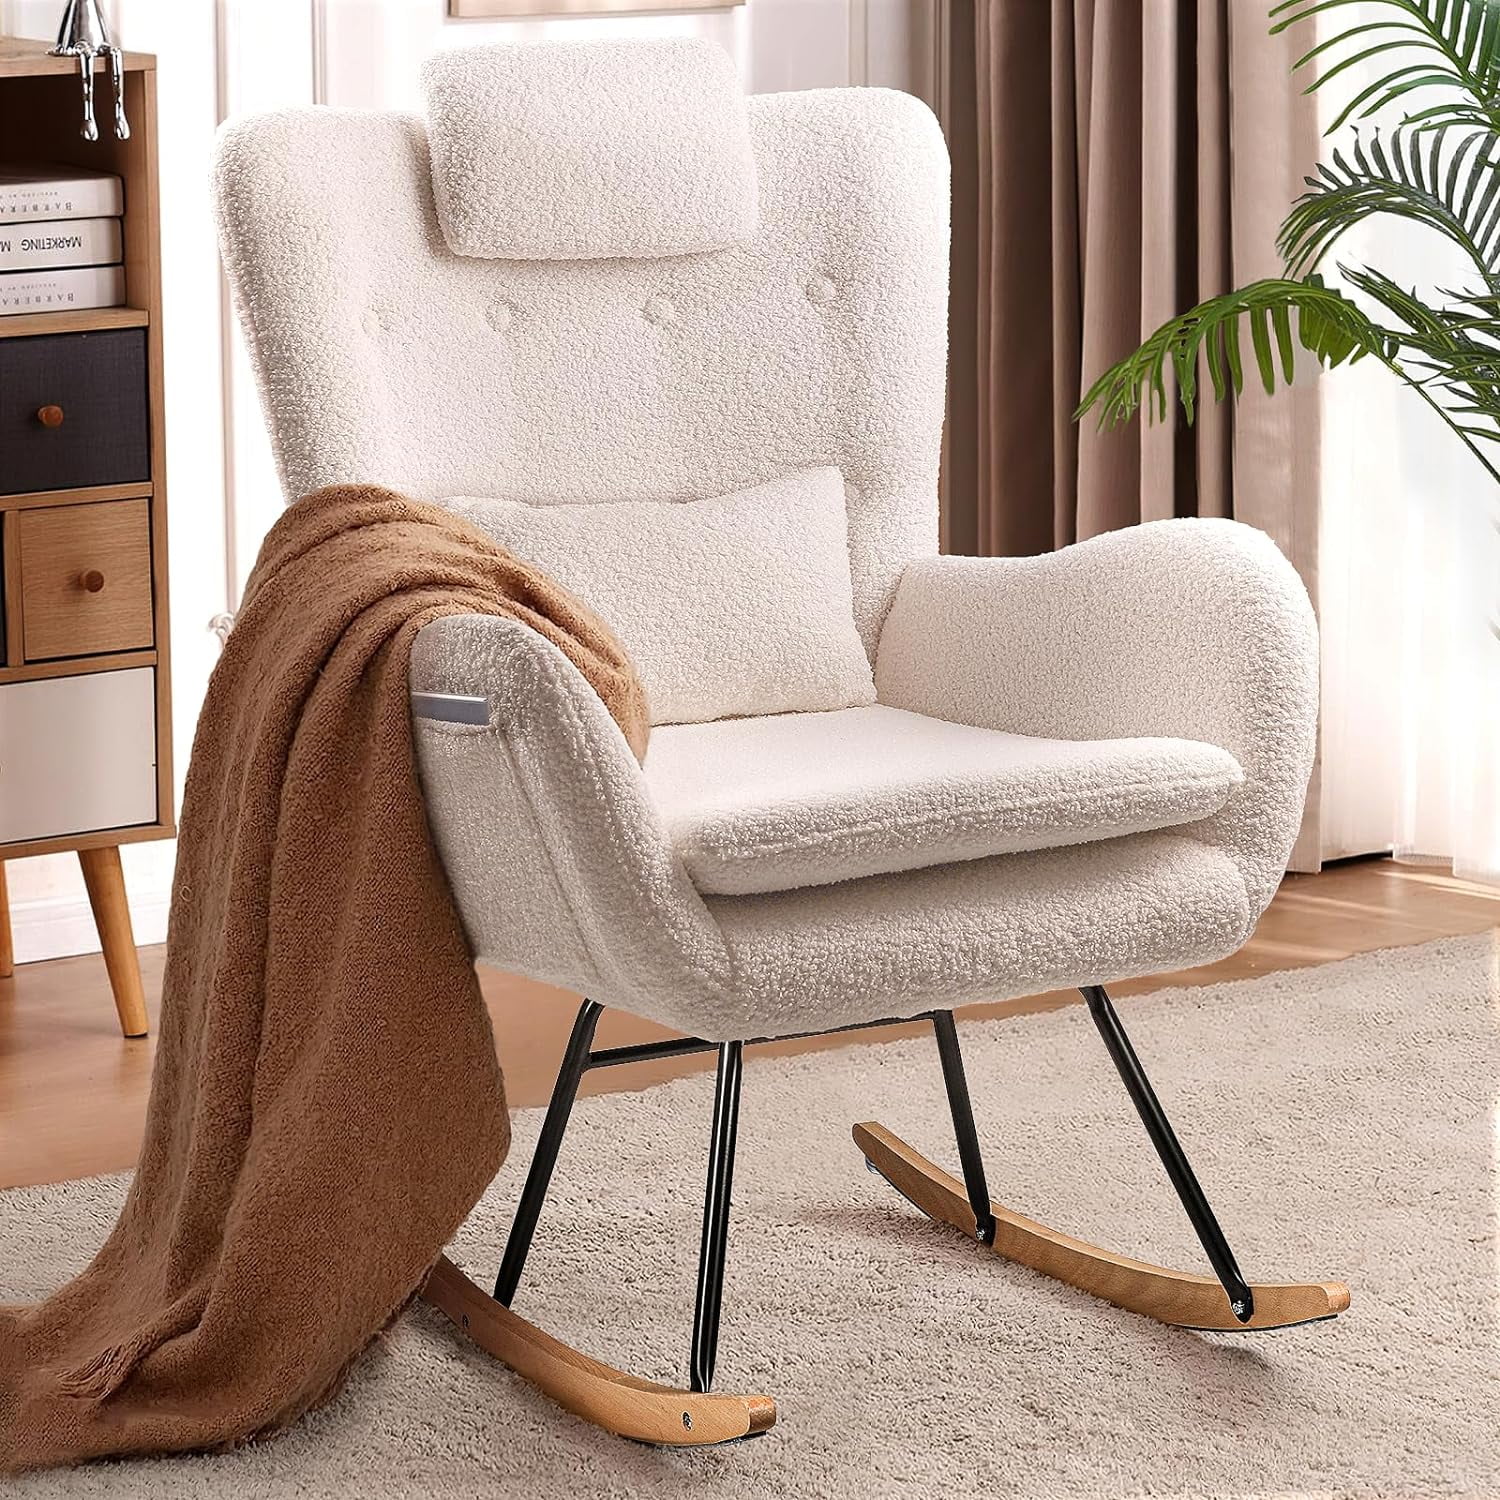 Teddy Fabric Seat Rocking Chair with High Backrest and Armrests Corrigan Studio Upholstery Color: Beige